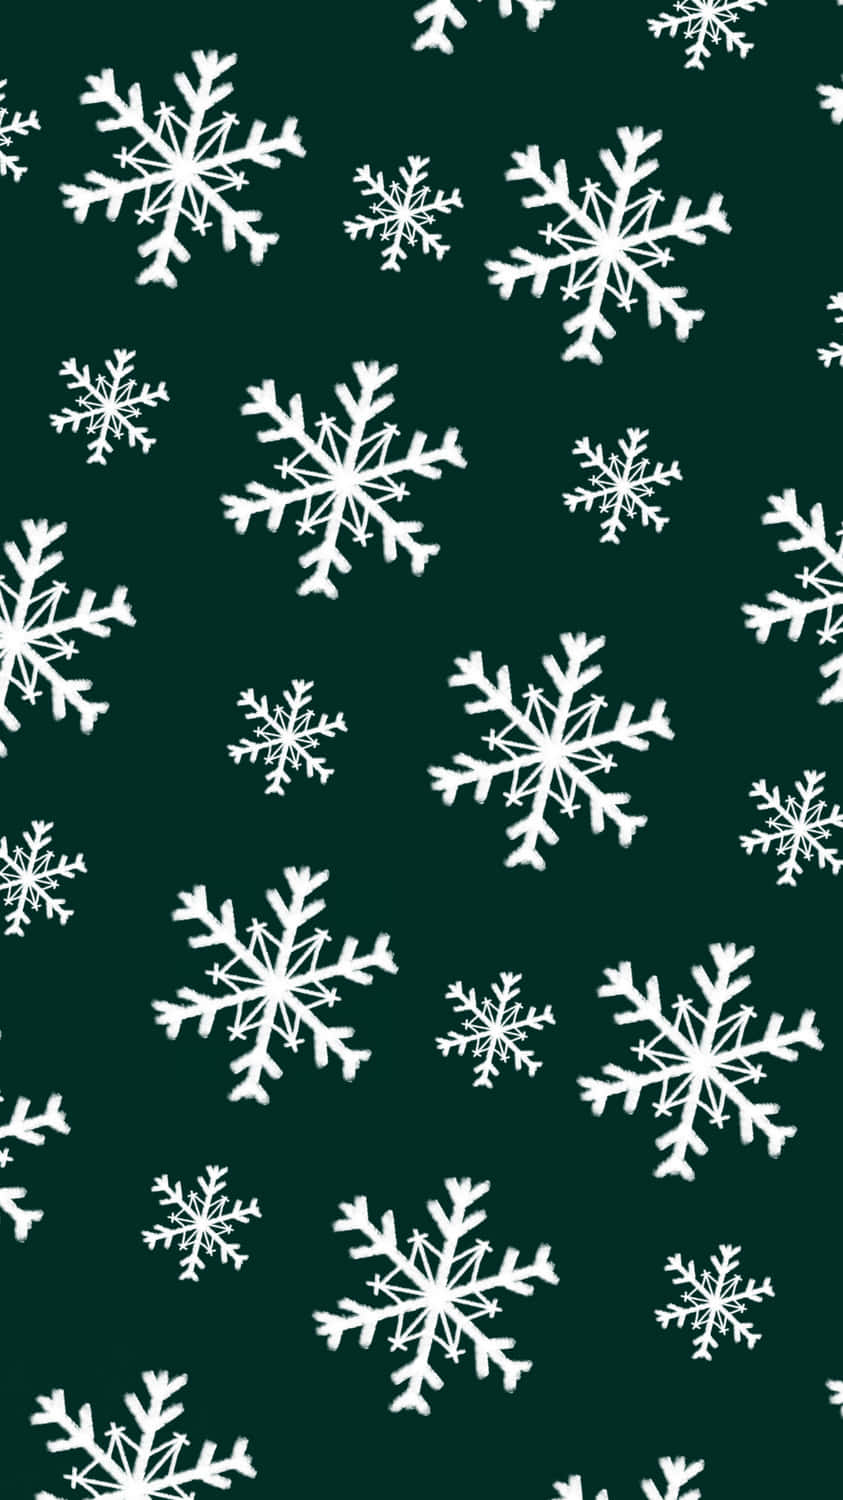 Celebrate the Festive Season in Style with a Dark Green Christmas Wallpaper